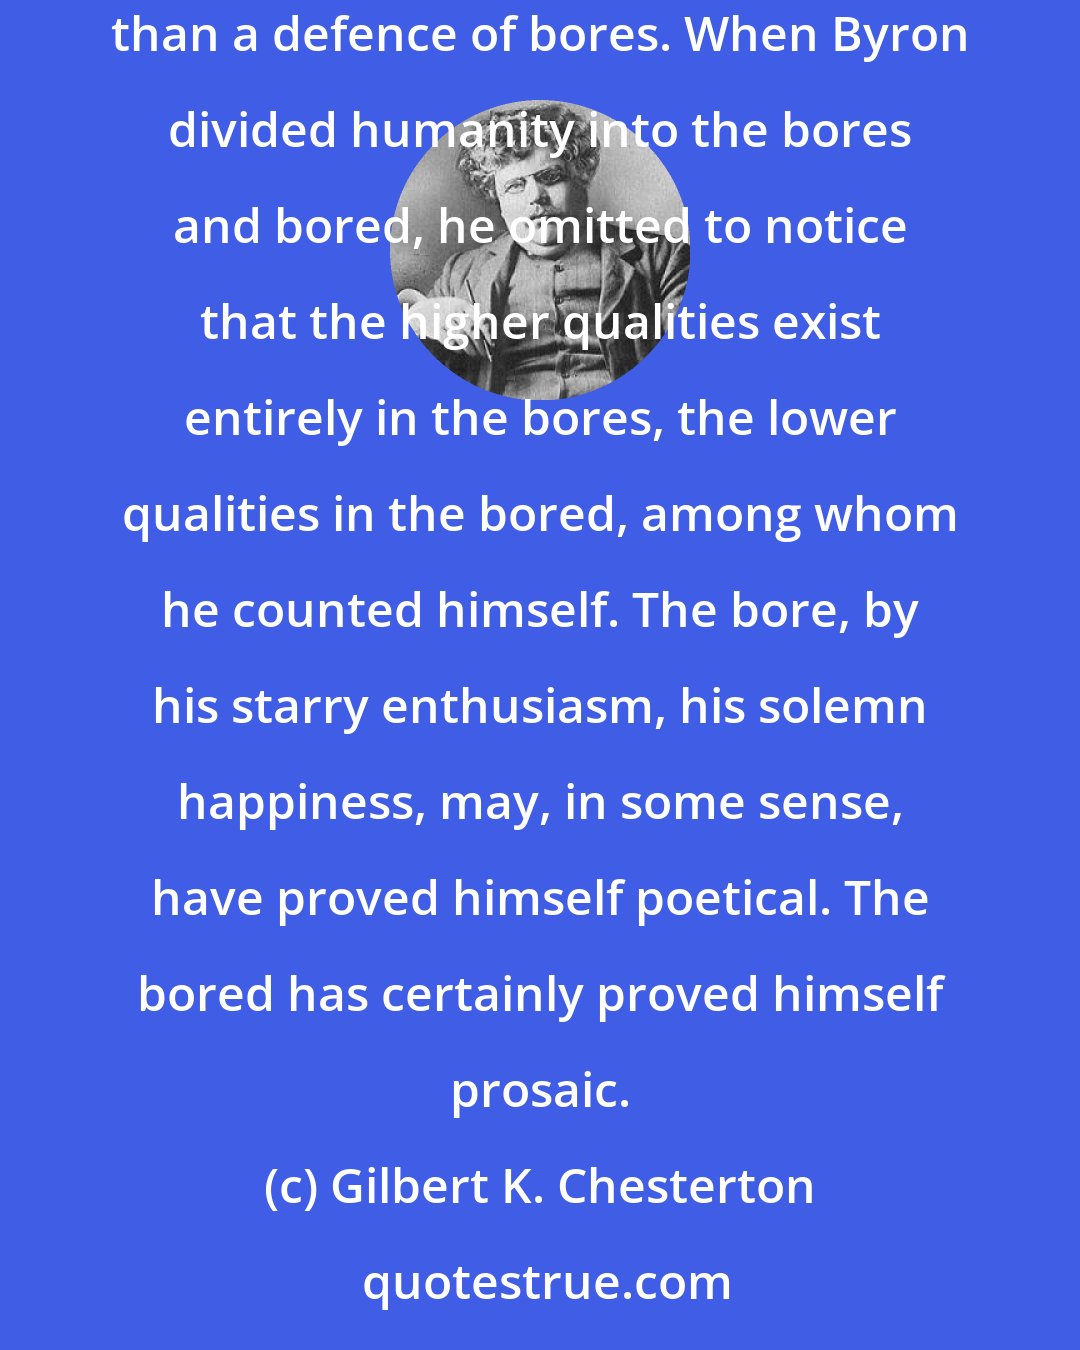 Gilbert K. Chesterton: There is no such thing on earth as an uninteresting subject; the only thing that can exist is an uninterested person. Nothing is more keenly required than a defence of bores. When Byron divided humanity into the bores and bored, he omitted to notice that the higher qualities exist entirely in the bores, the lower qualities in the bored, among whom he counted himself. The bore, by his starry enthusiasm, his solemn happiness, may, in some sense, have proved himself poetical. The bored has certainly proved himself prosaic.